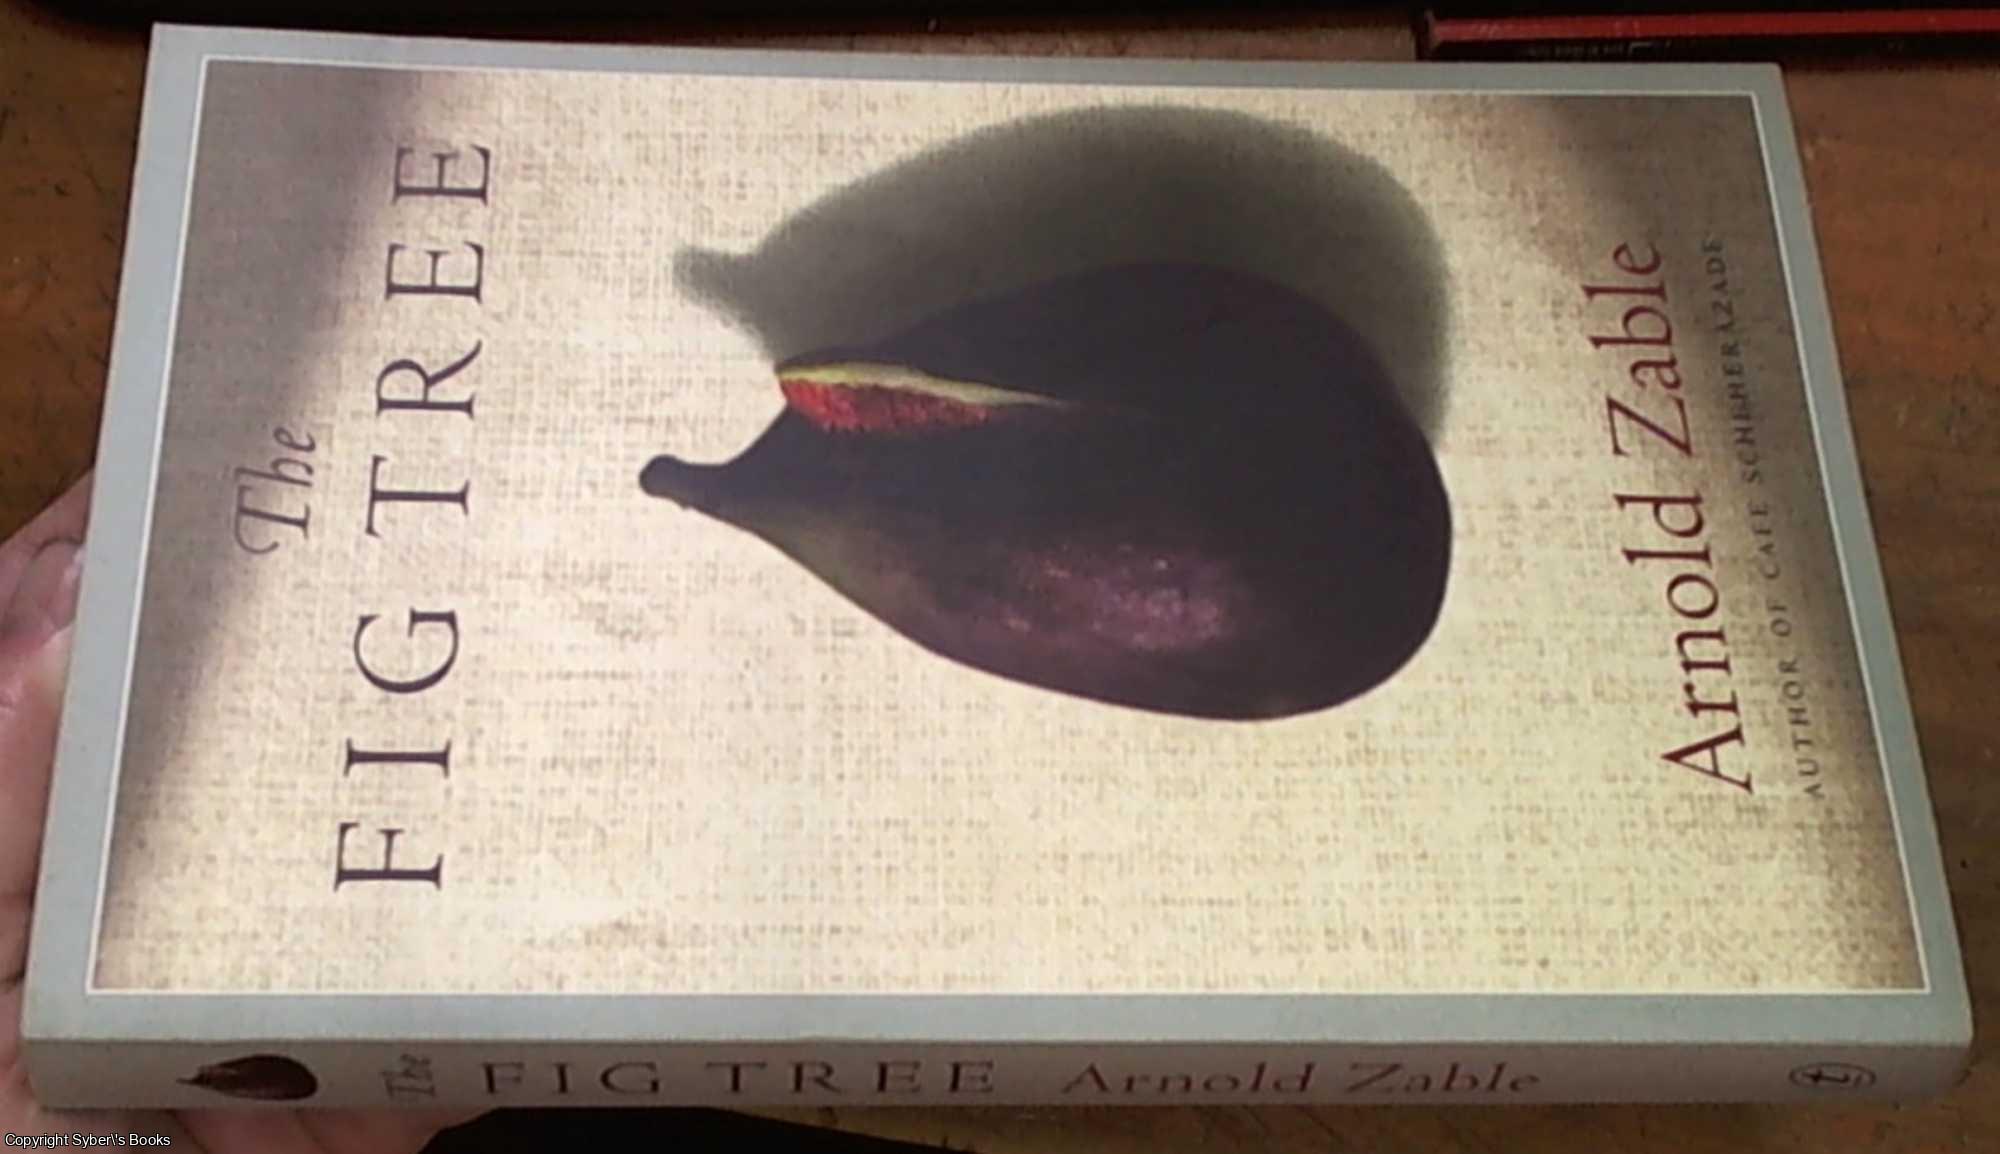 Zable, Arnold - The Fig Tree